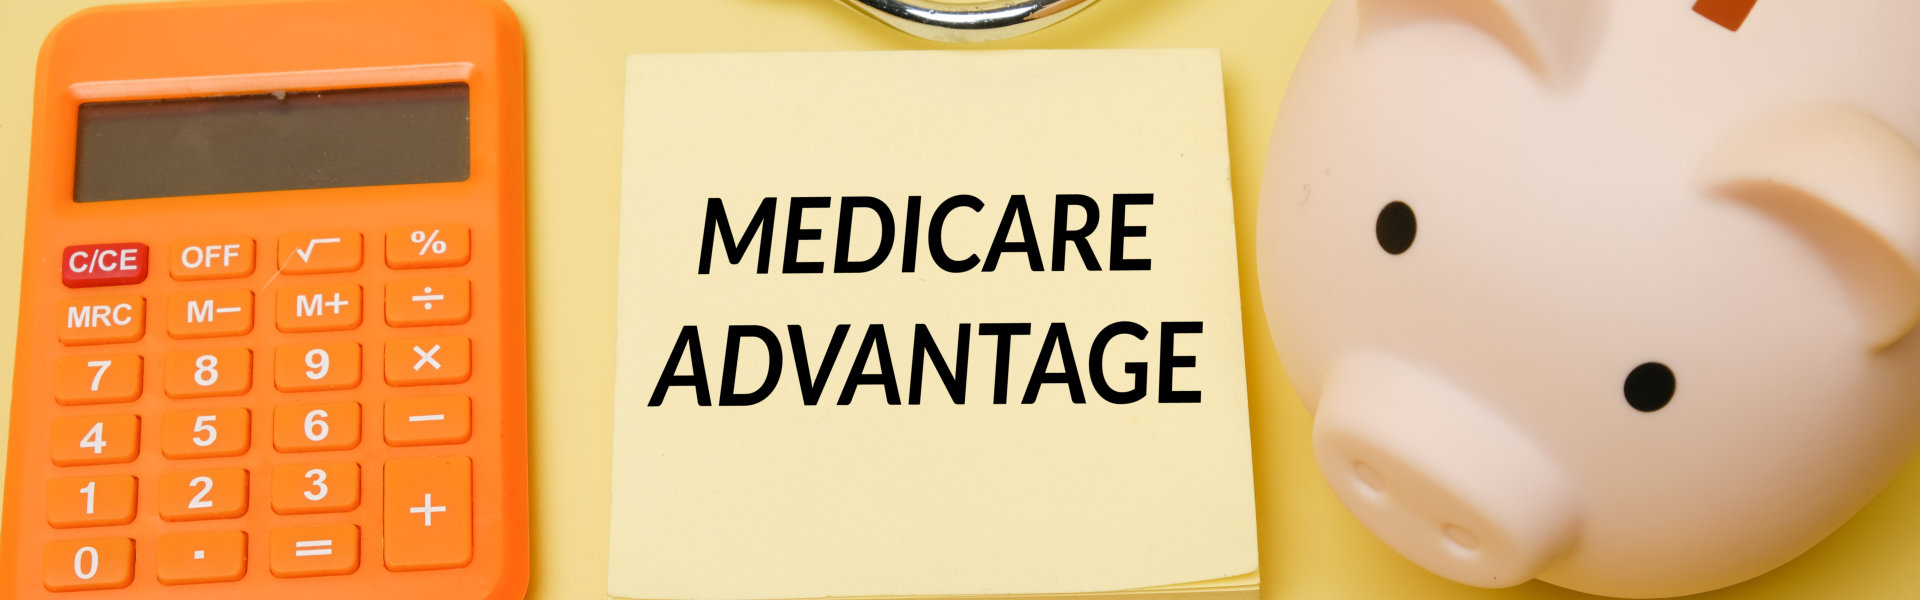 medicare advantage text on sticky notes with piggy bank and calculator